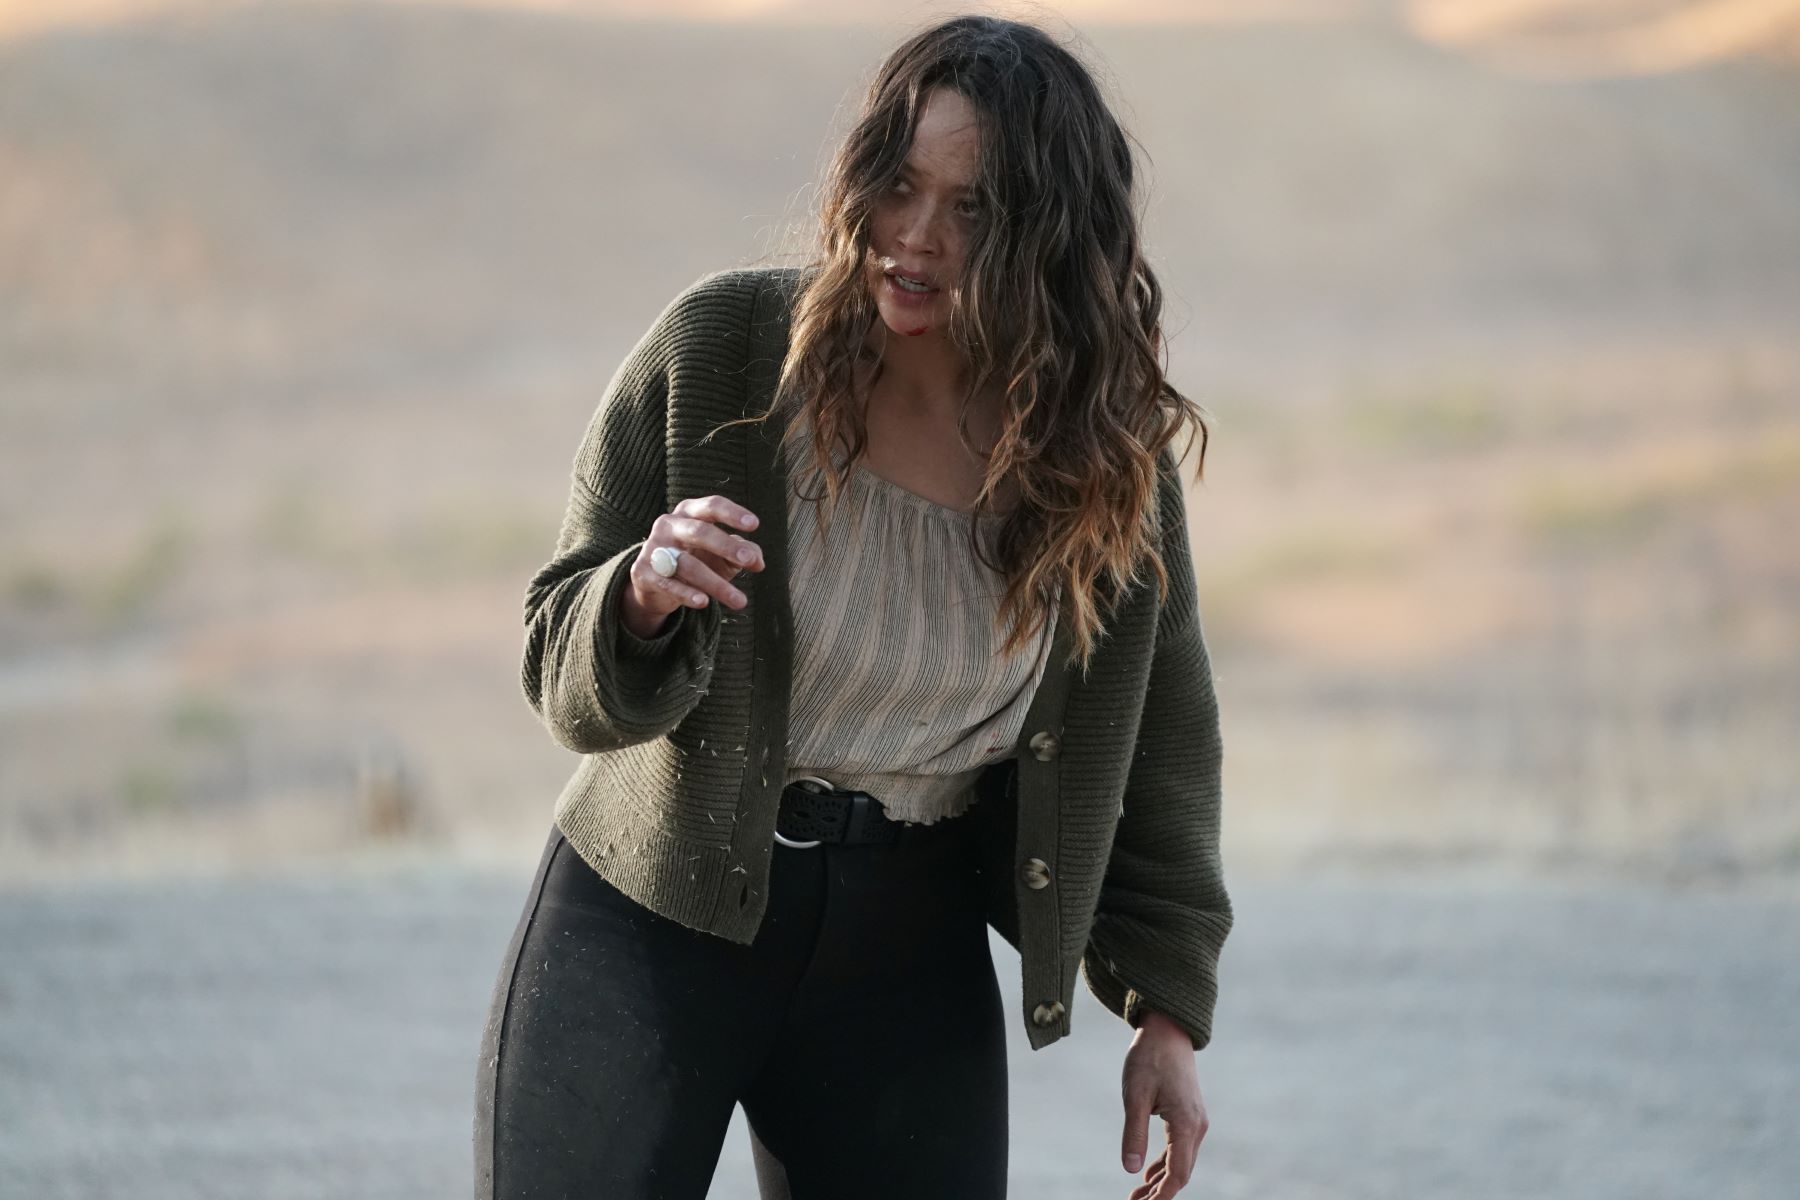 Melissa O'Neil, in character as Lucy Chen in 'The Rookie' on ABC, films a scene where she was captured by a man working with Rosalind Dyer, who apparently died in season 5. Lucy wears a dark green cardigan over a white top and black pants.